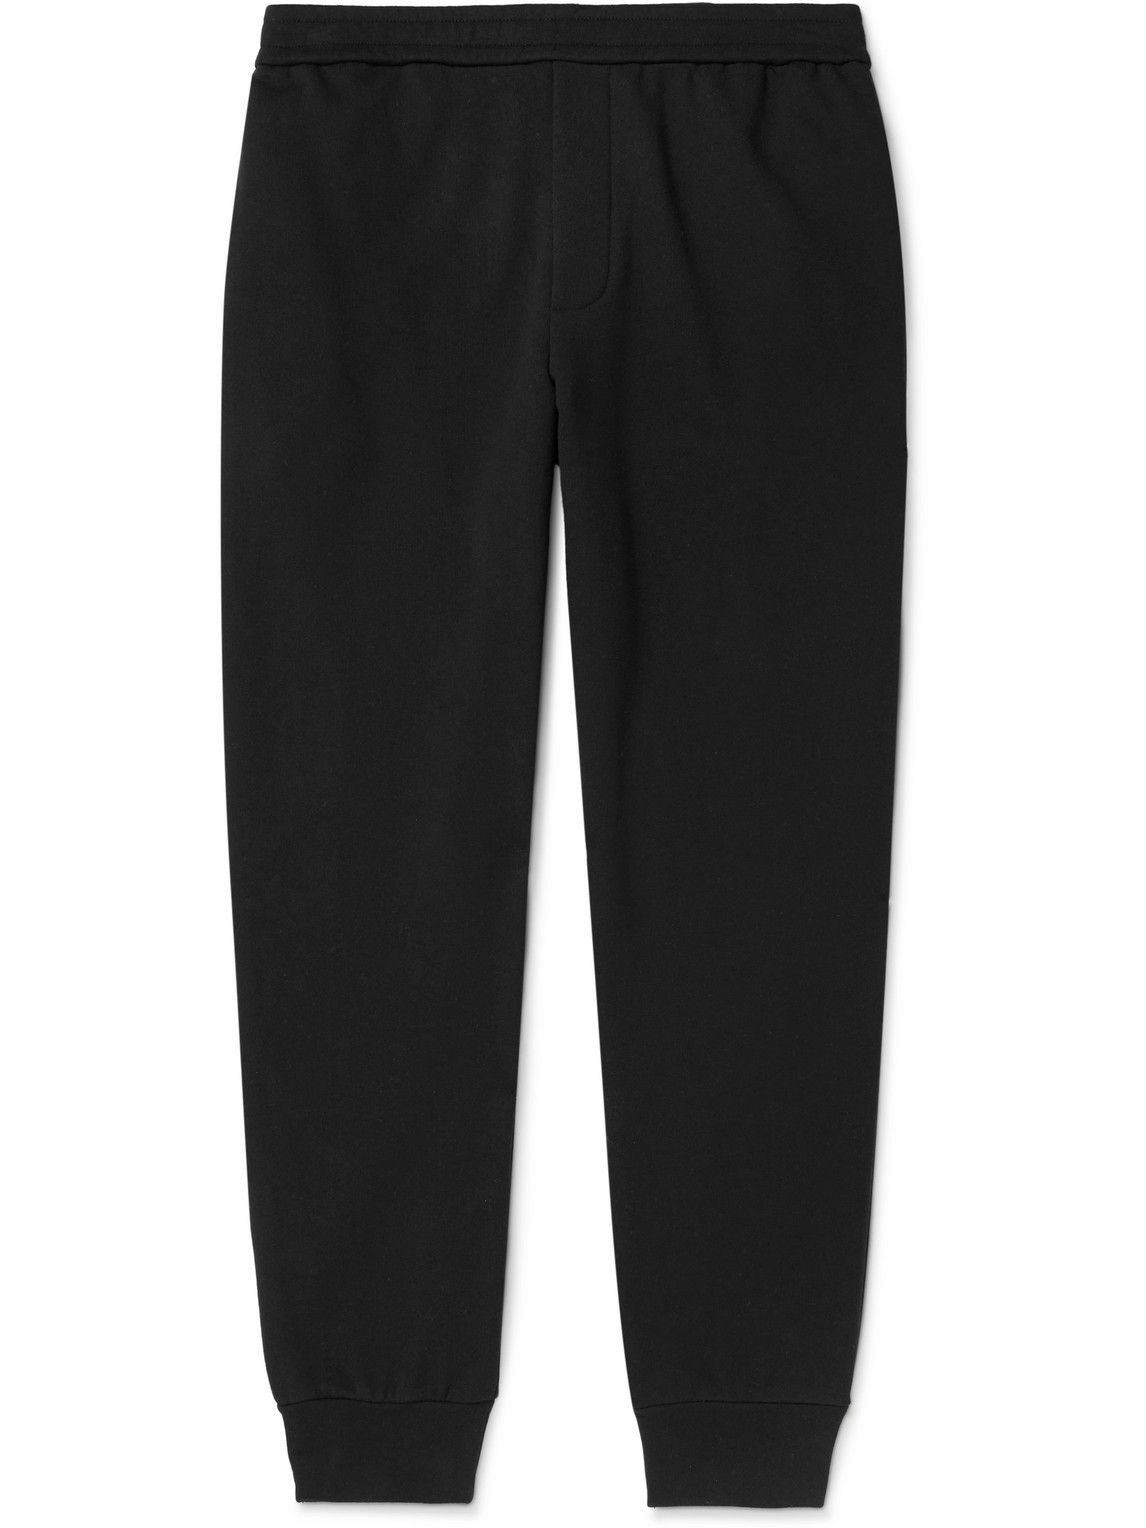 The Row - Edgar Tapered Cotton-Jersey Sweatpants - Black The Row